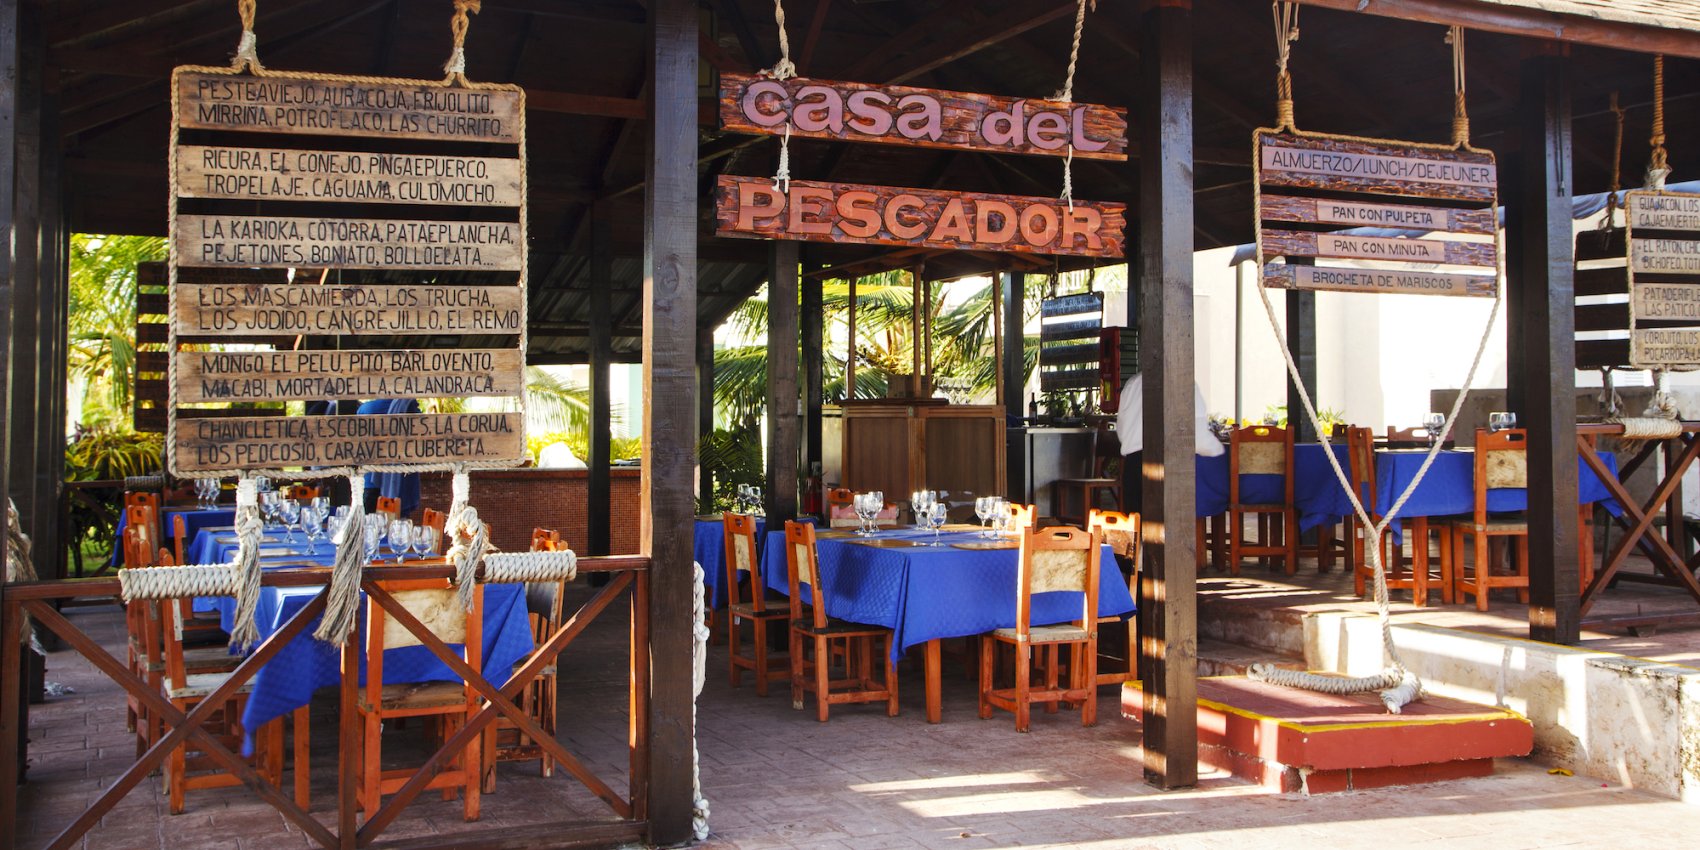 View of the entrance and empty outdoor seating at a restaurant in Cuba